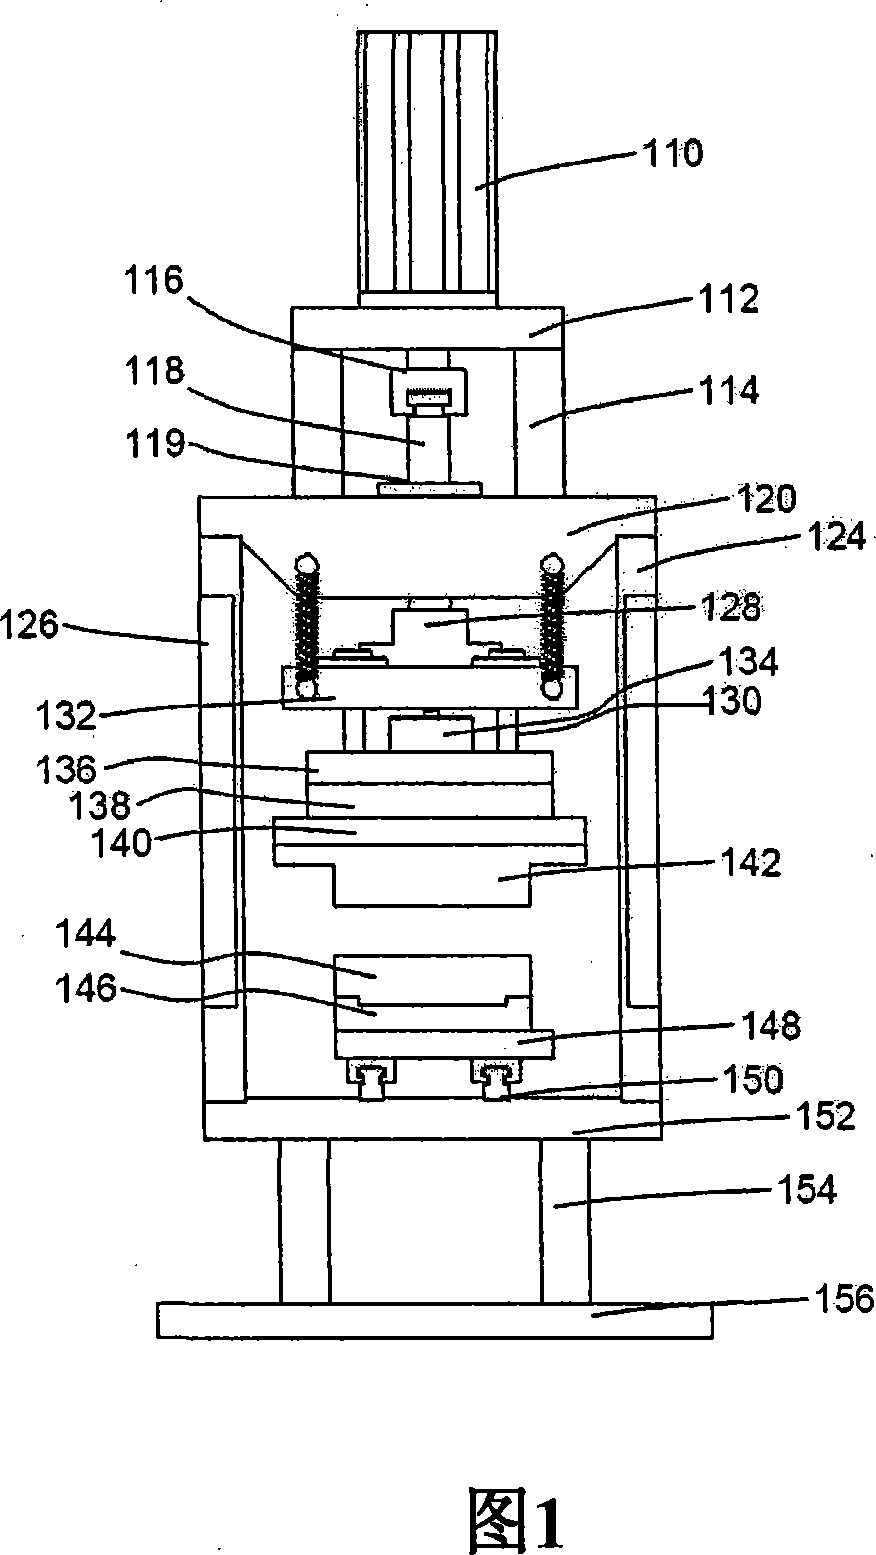 Battery pack production device